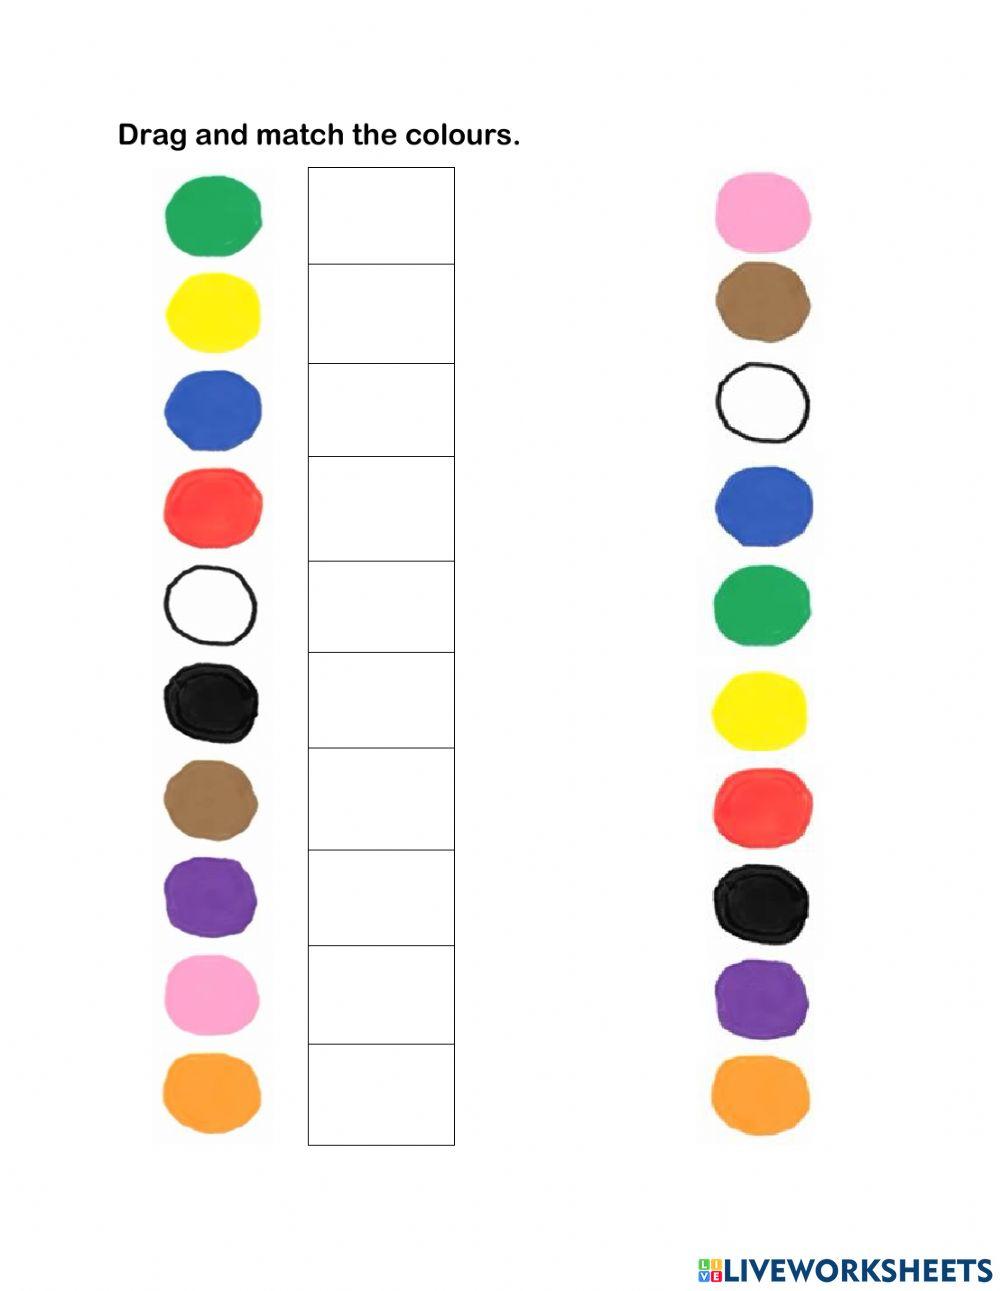 Matching Colours exercise | Live Worksheets